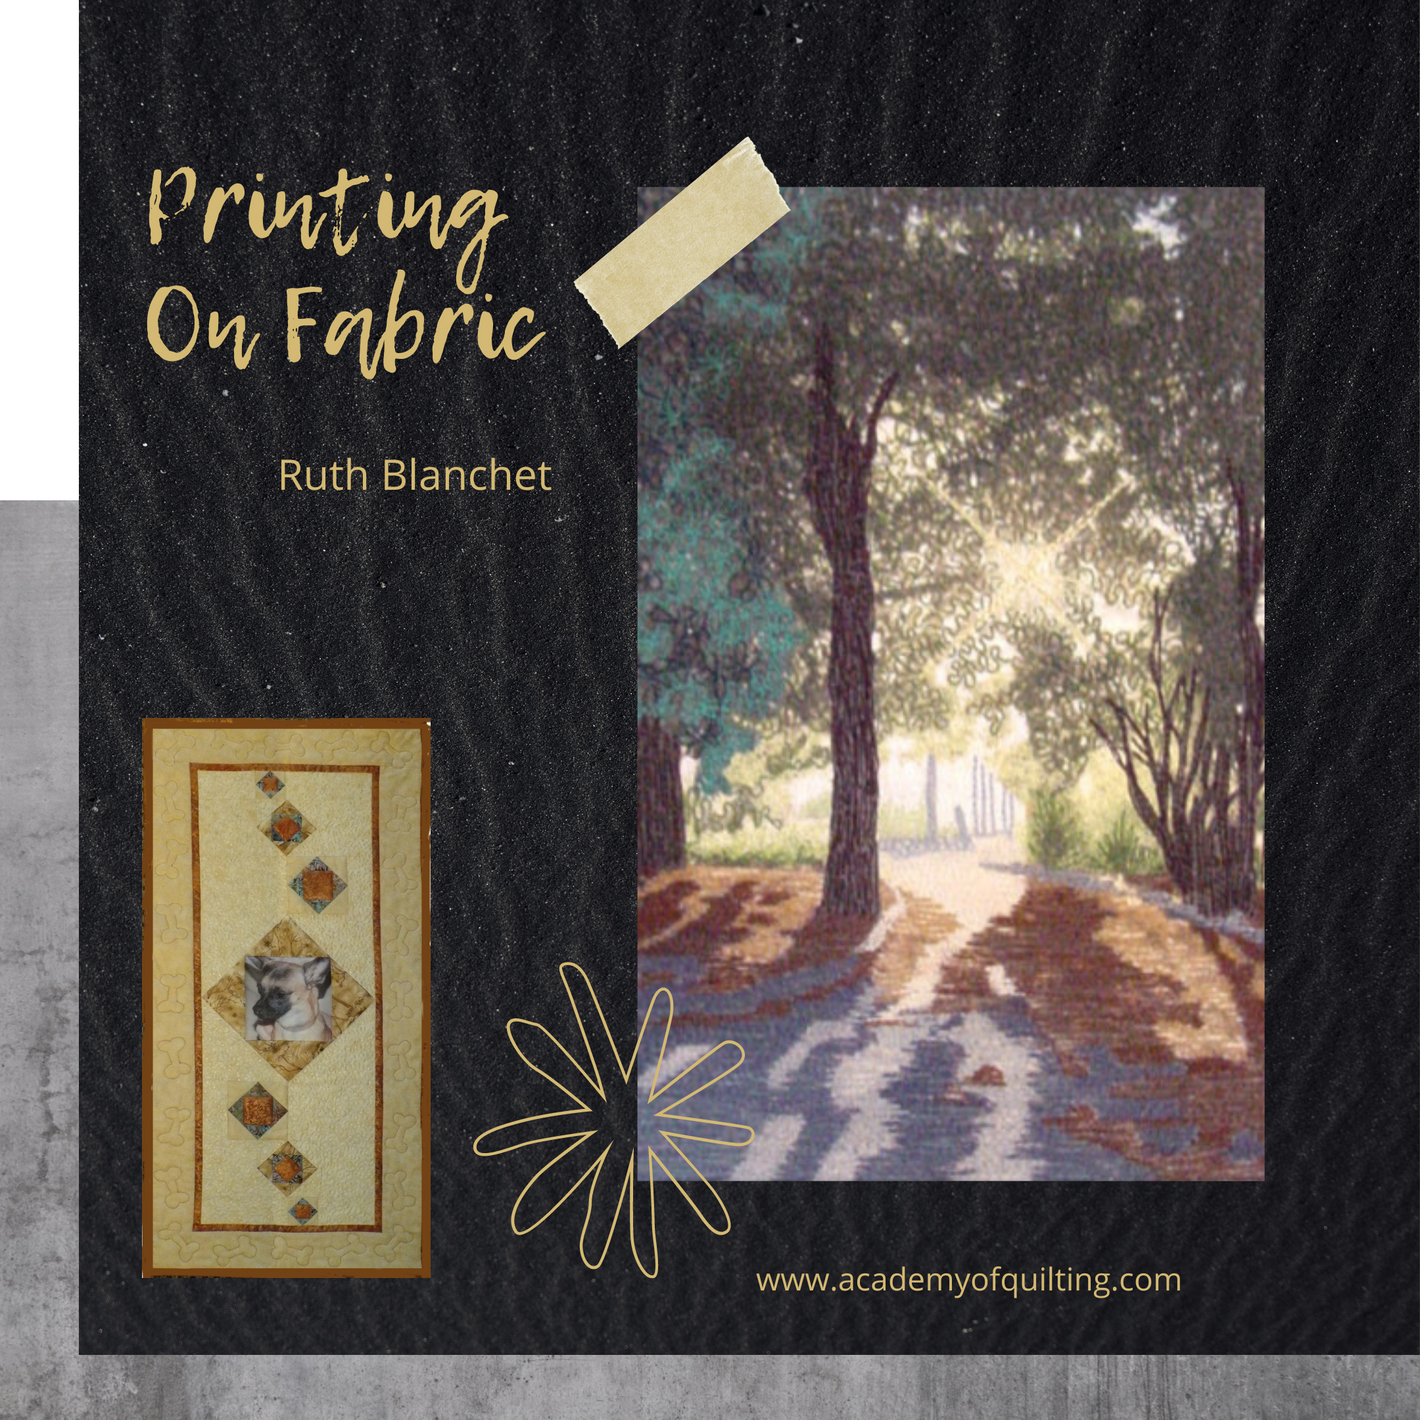 Learn how to transfer photographs to fabric, then make one of four projects in Ruth's online workshop